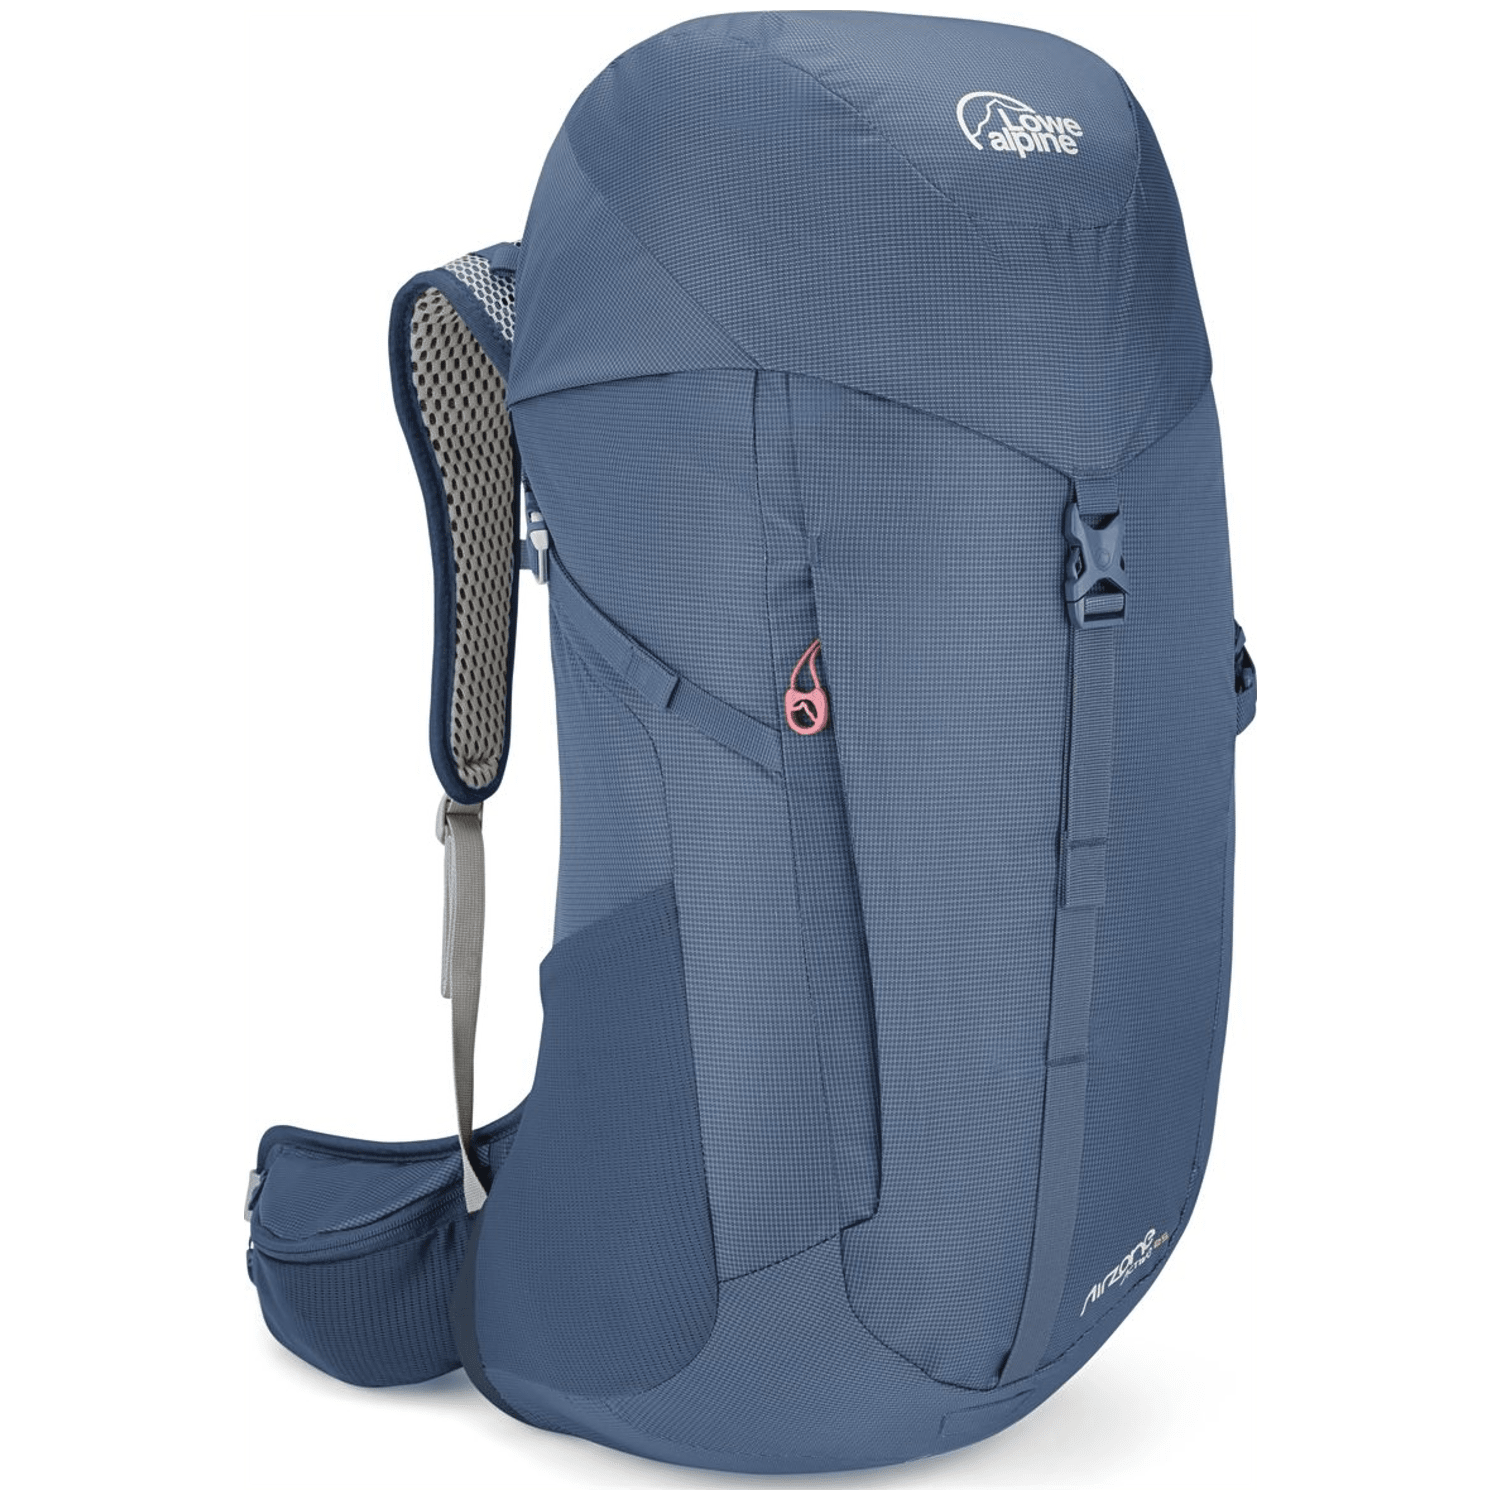 Lowe Alpin AirZone Active Nd25 Damen Daybag